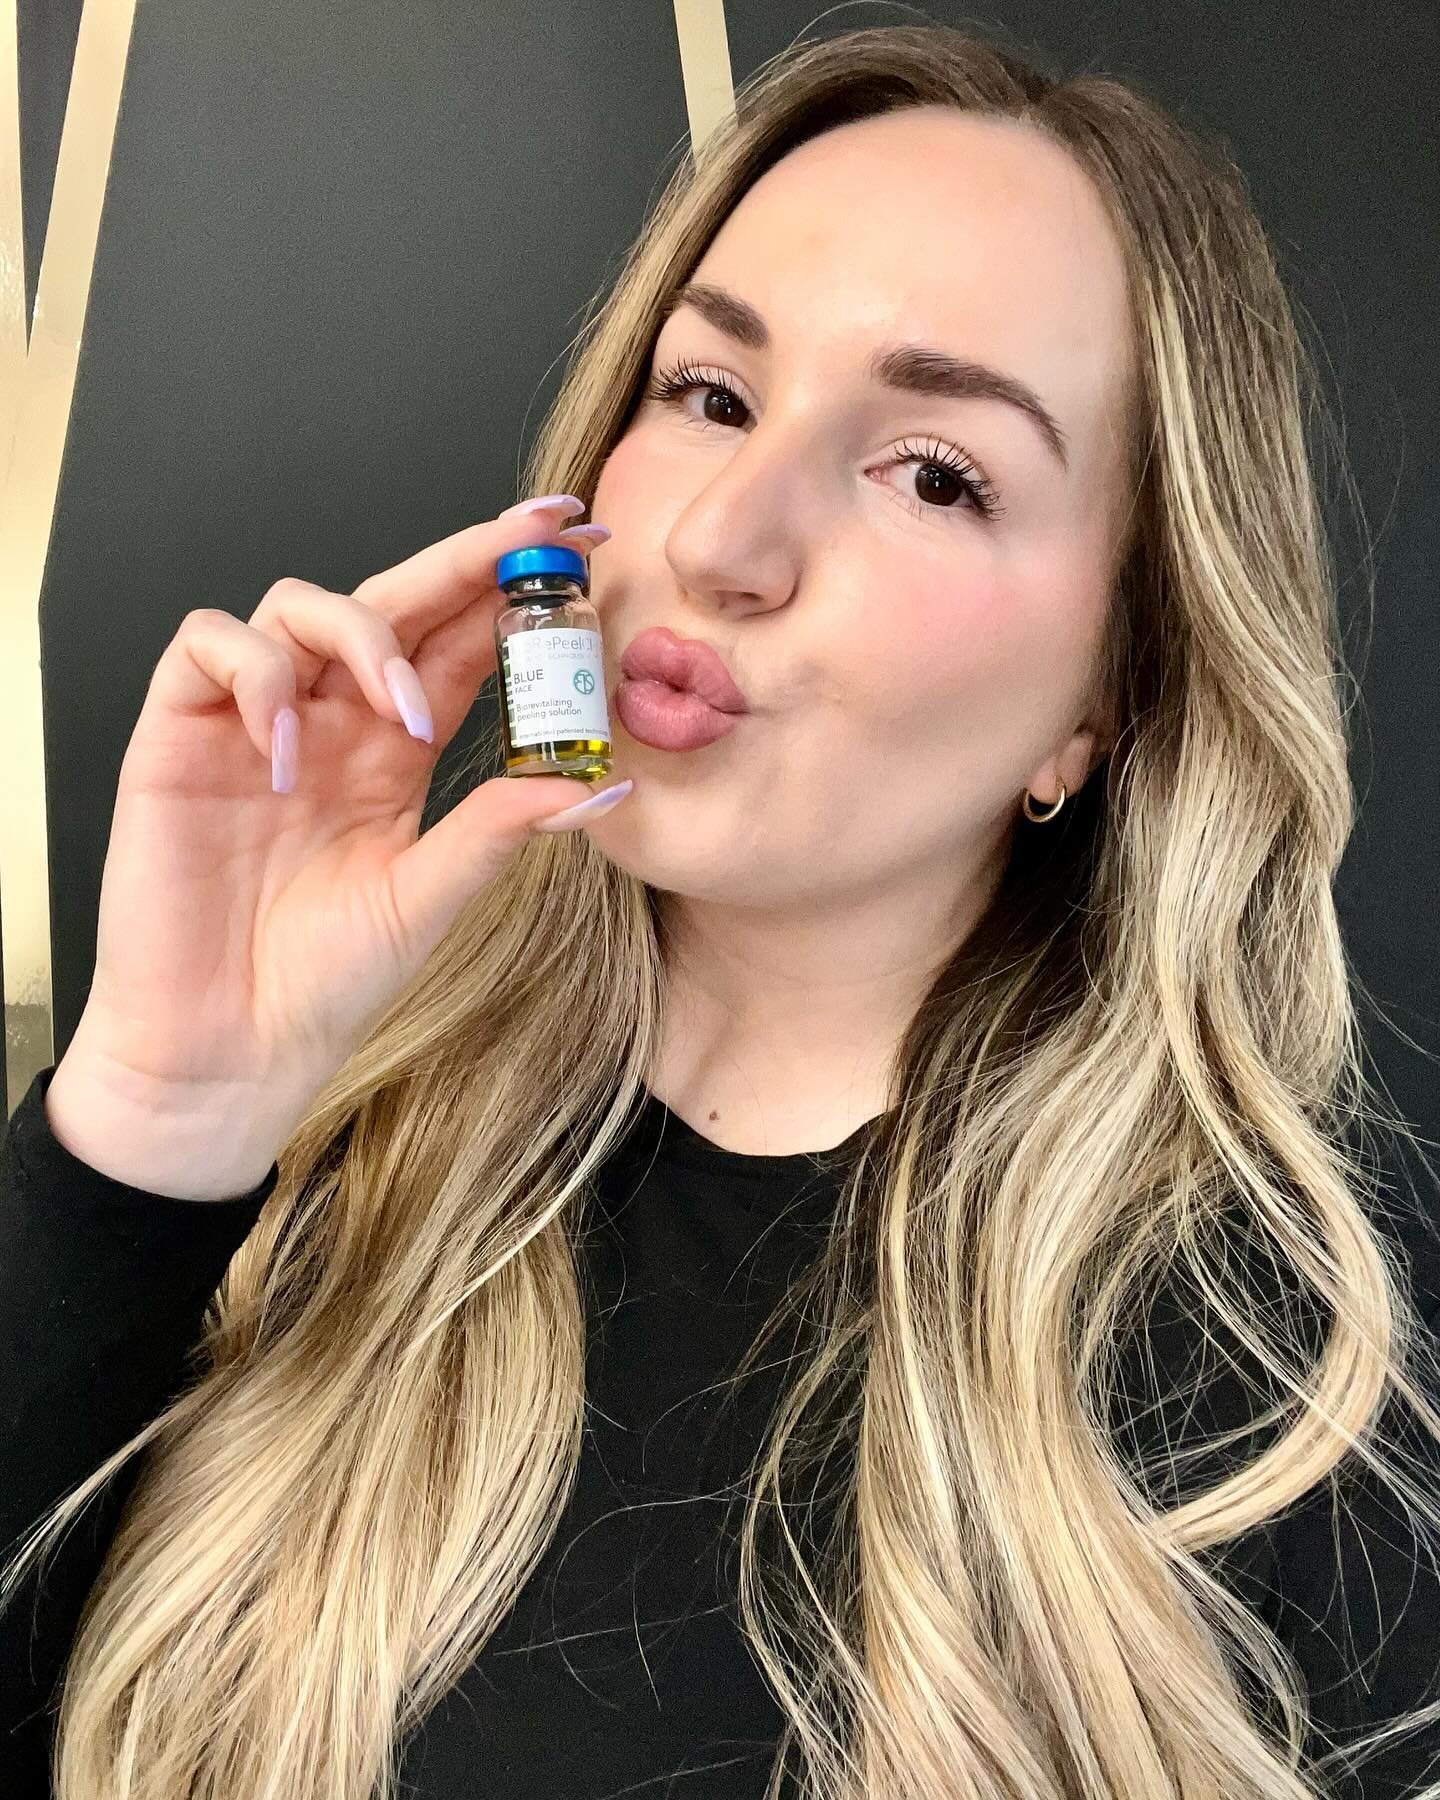 Me + BioRePeel = 💘

Swipe to see the immediate glow after a treatment ✨

Our spring promotion is running until the end of May if you&rsquo;ve been wanting to try a chemical peel 💚 Link in bio to book online!

#laserhairremovalniagara #niagara #micr